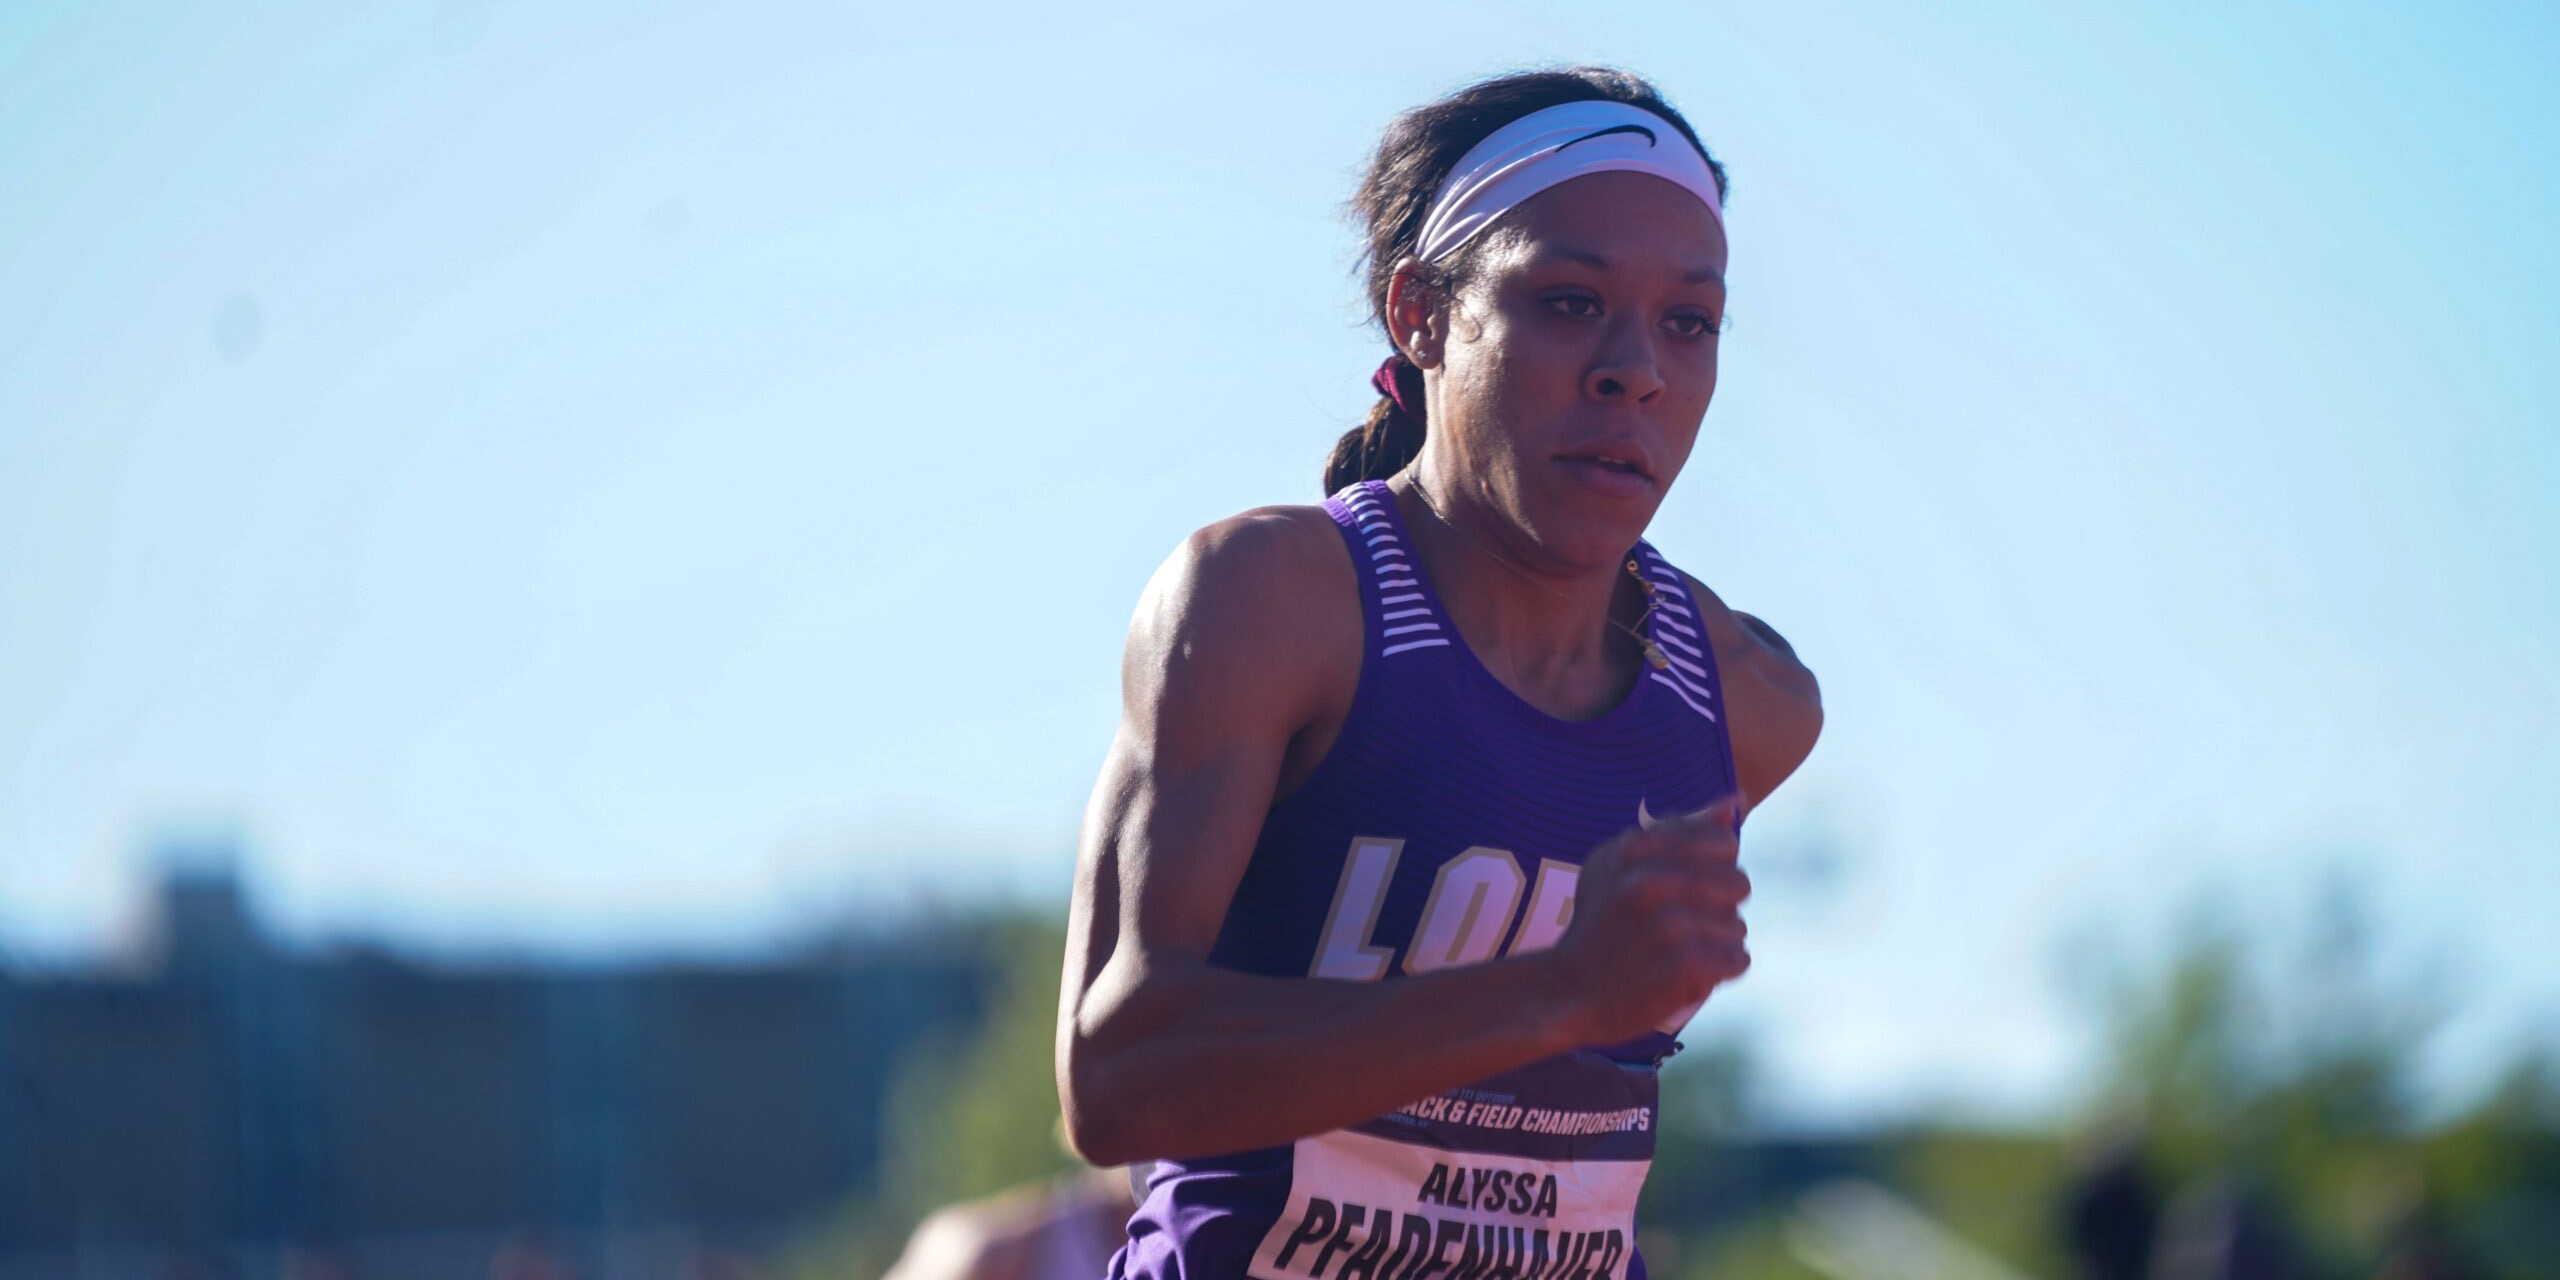 Loras College Track and Field student running